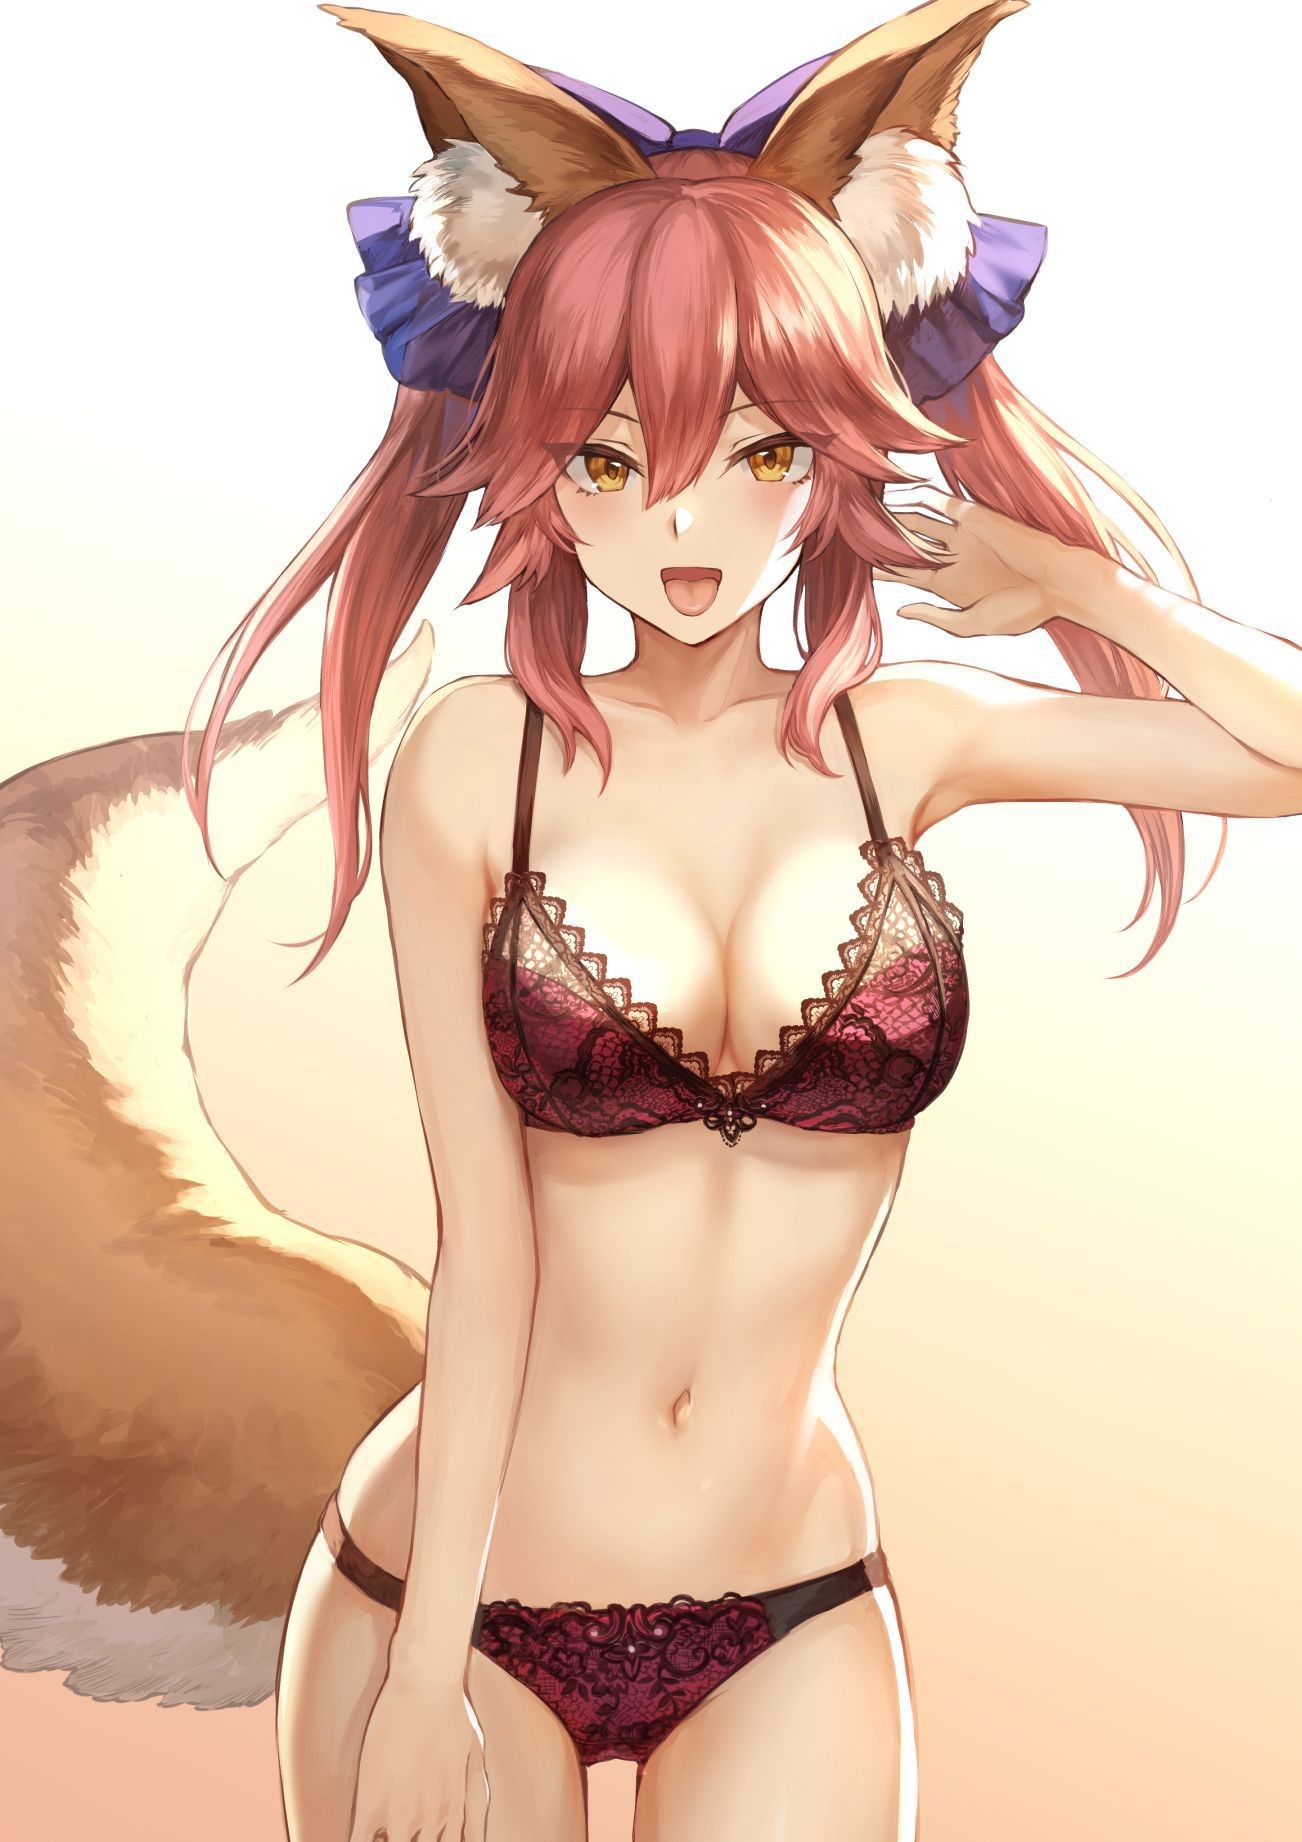 Squirting [Secondary Erotic] Fate/Grand Order (Fate/EXTRA), Cass Fox And Tamamo's Front Of The Image Summary! No.08 [20 Sheets] Rough